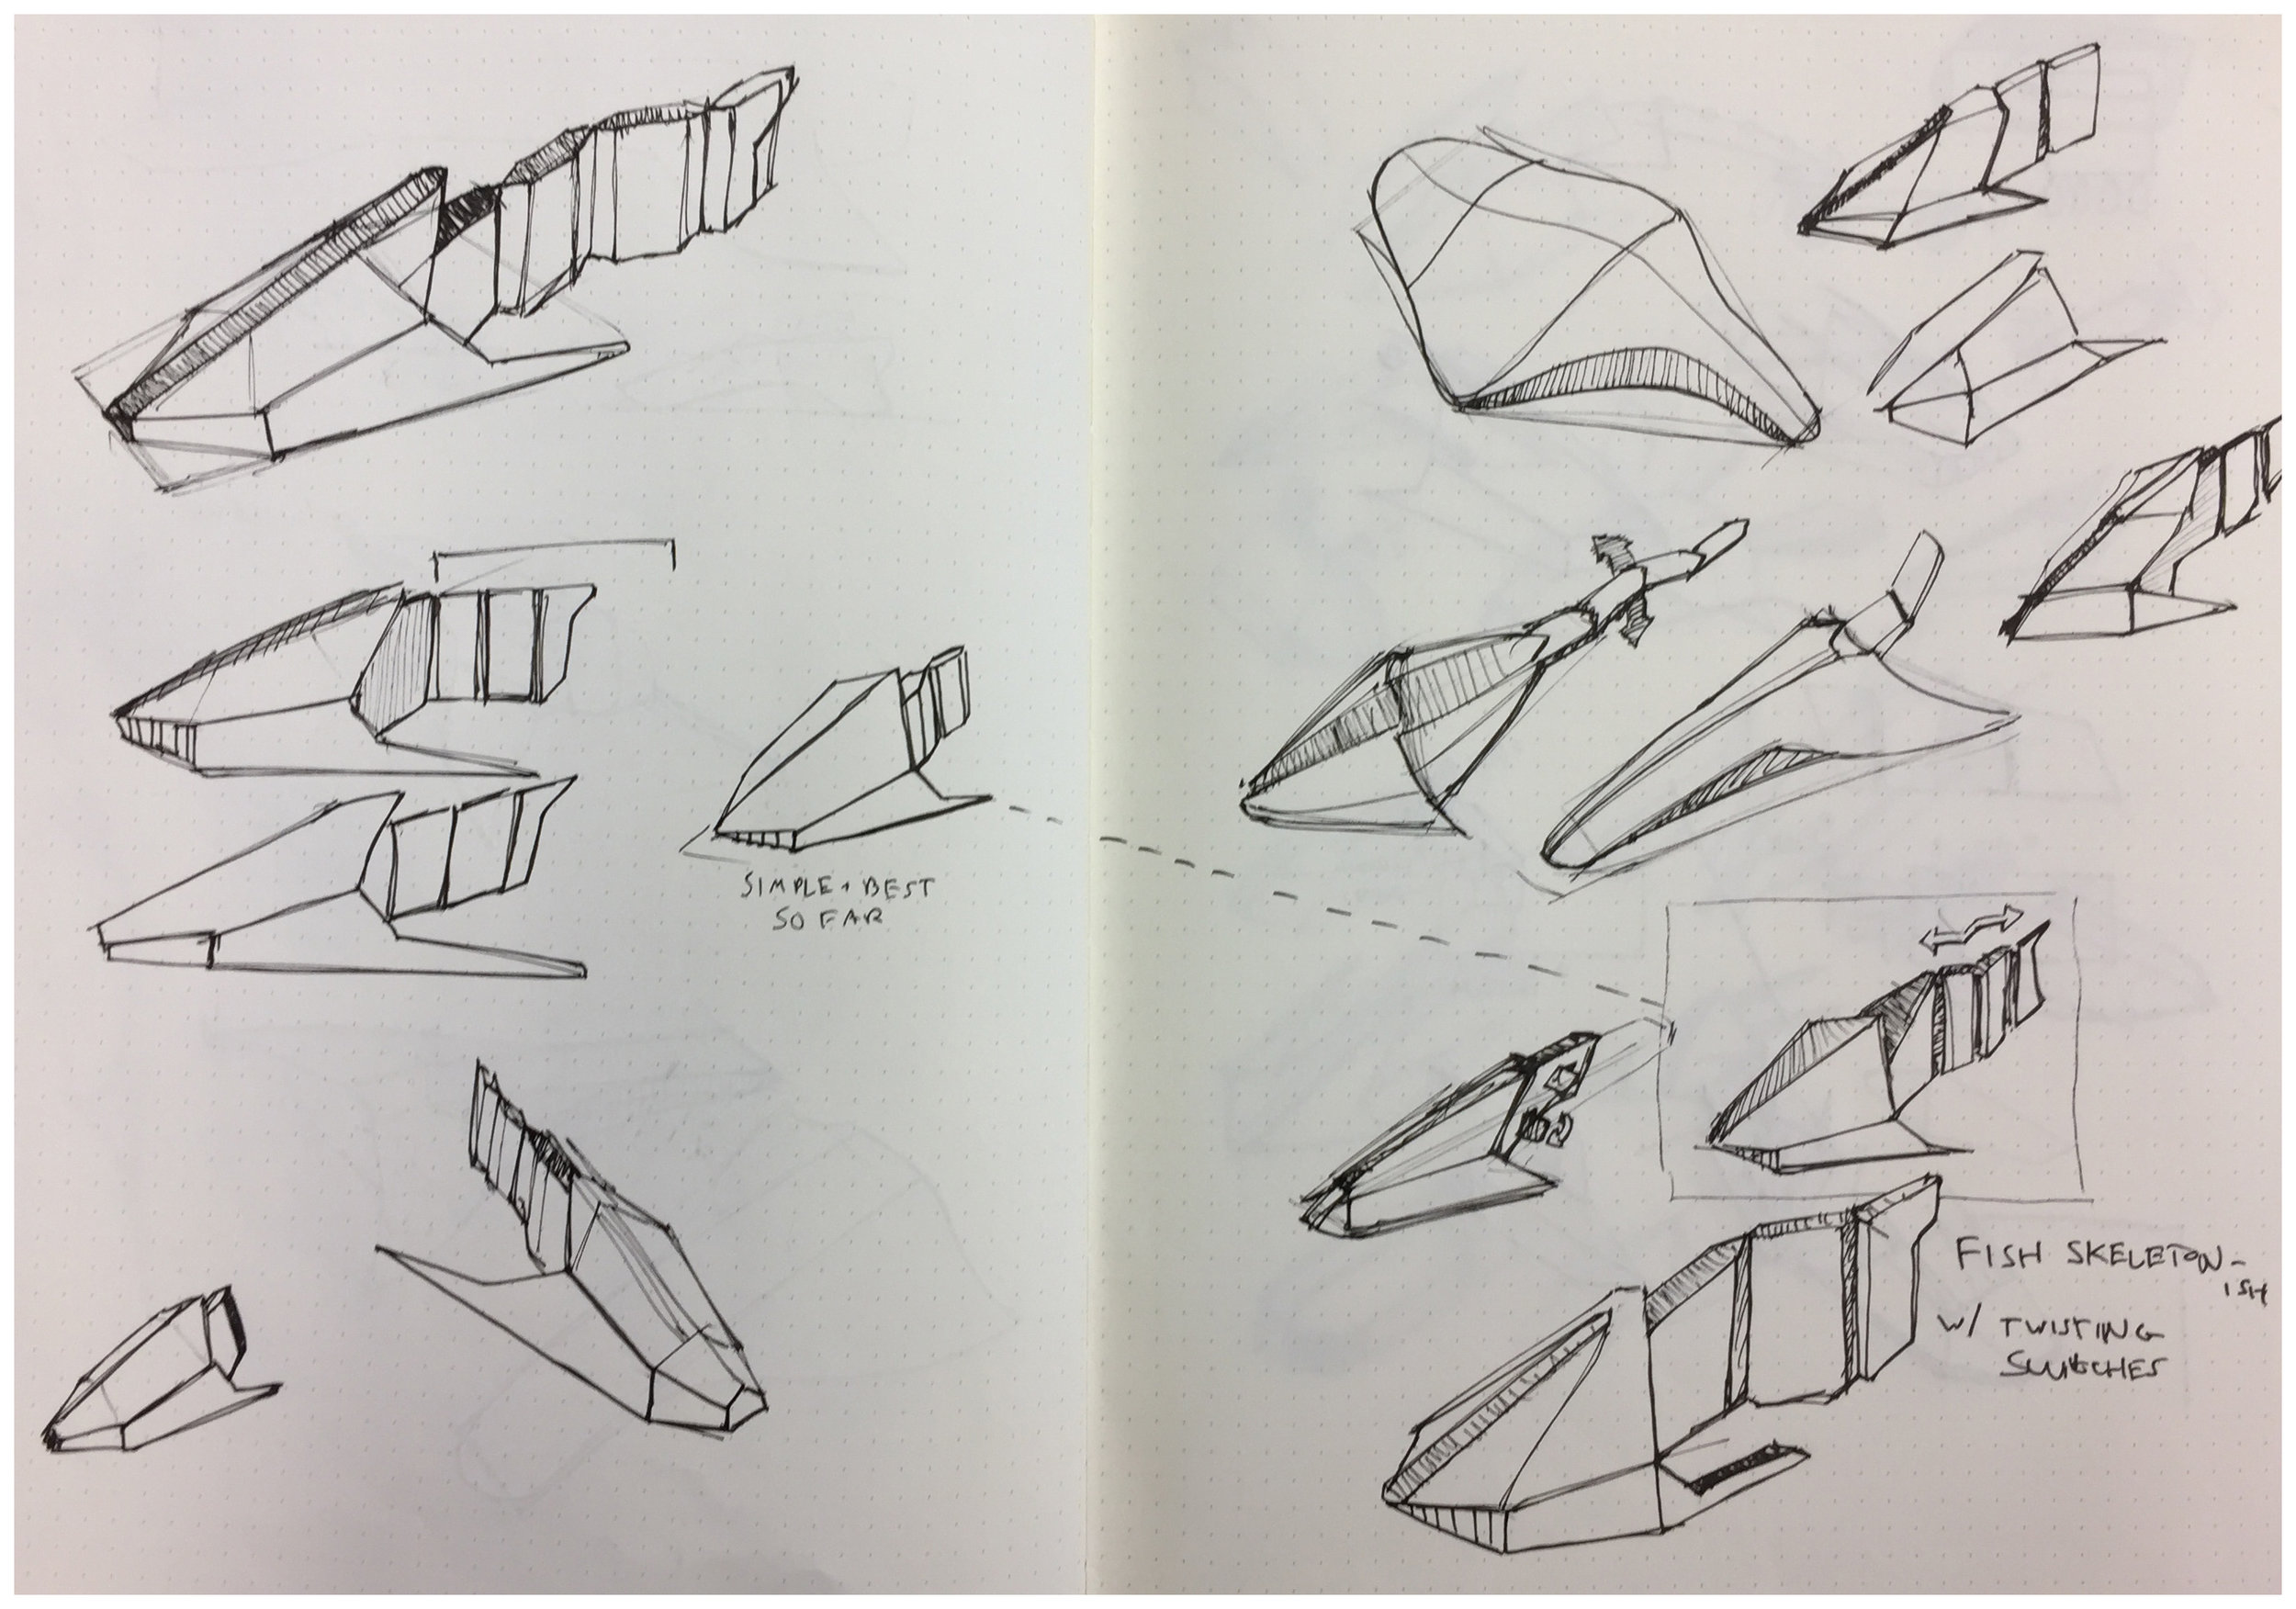  Sketches showing change from organic to mechanical forms 